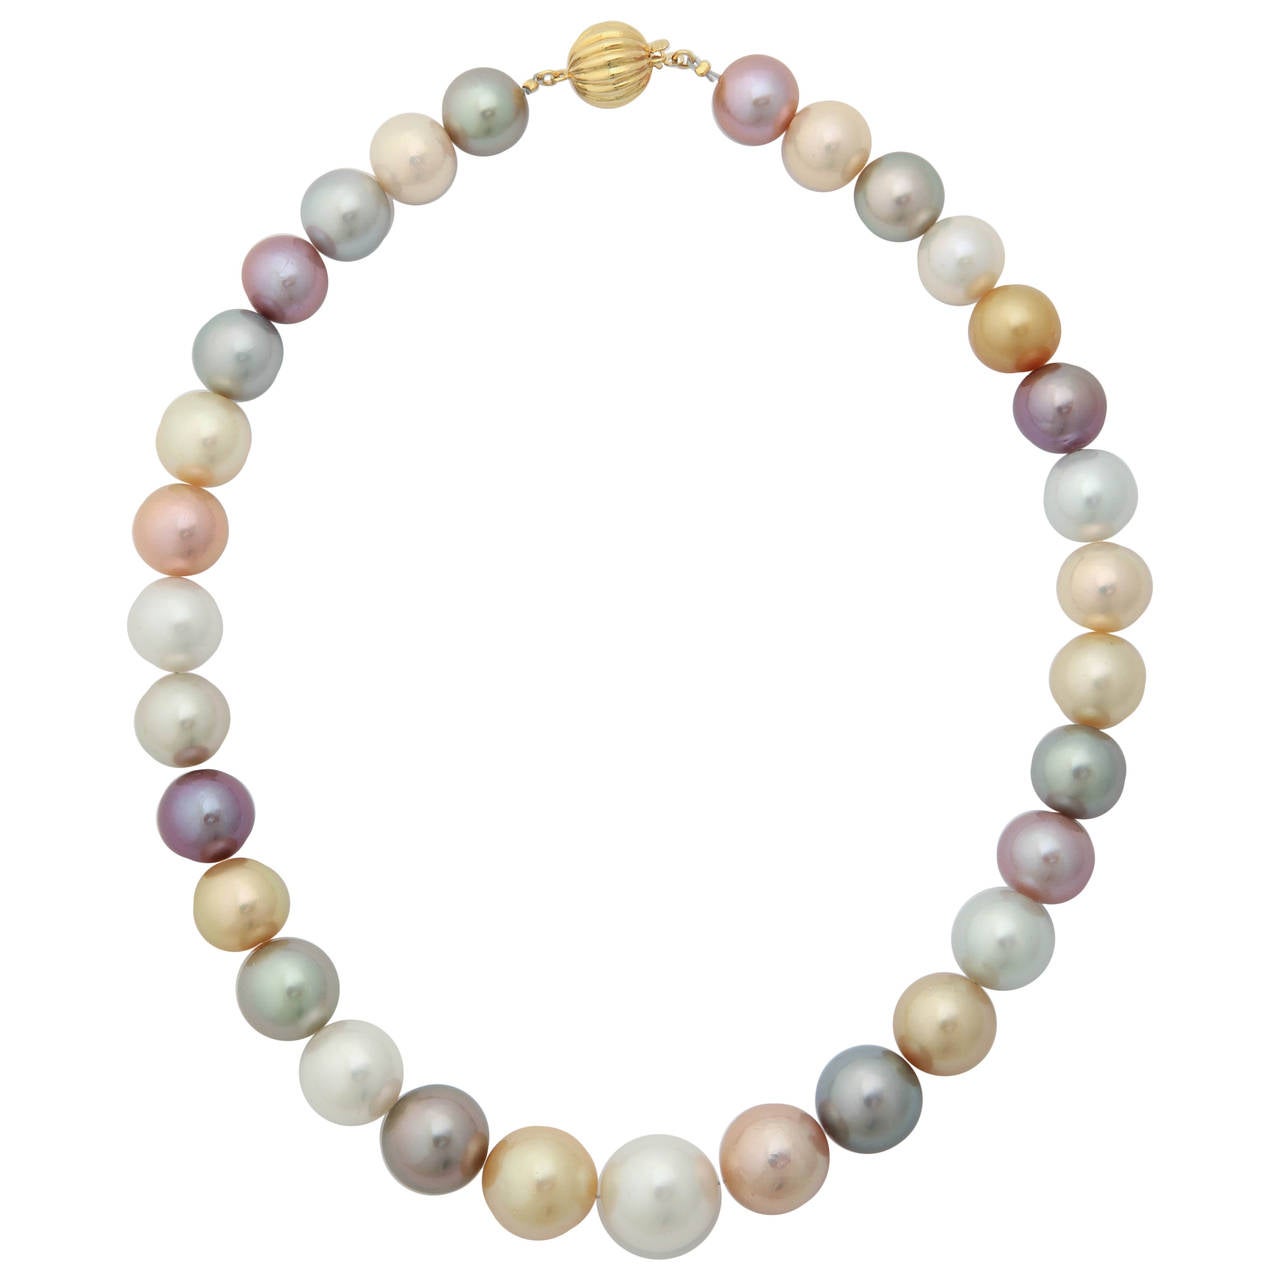 Exceptional Colored Pearl Necklace